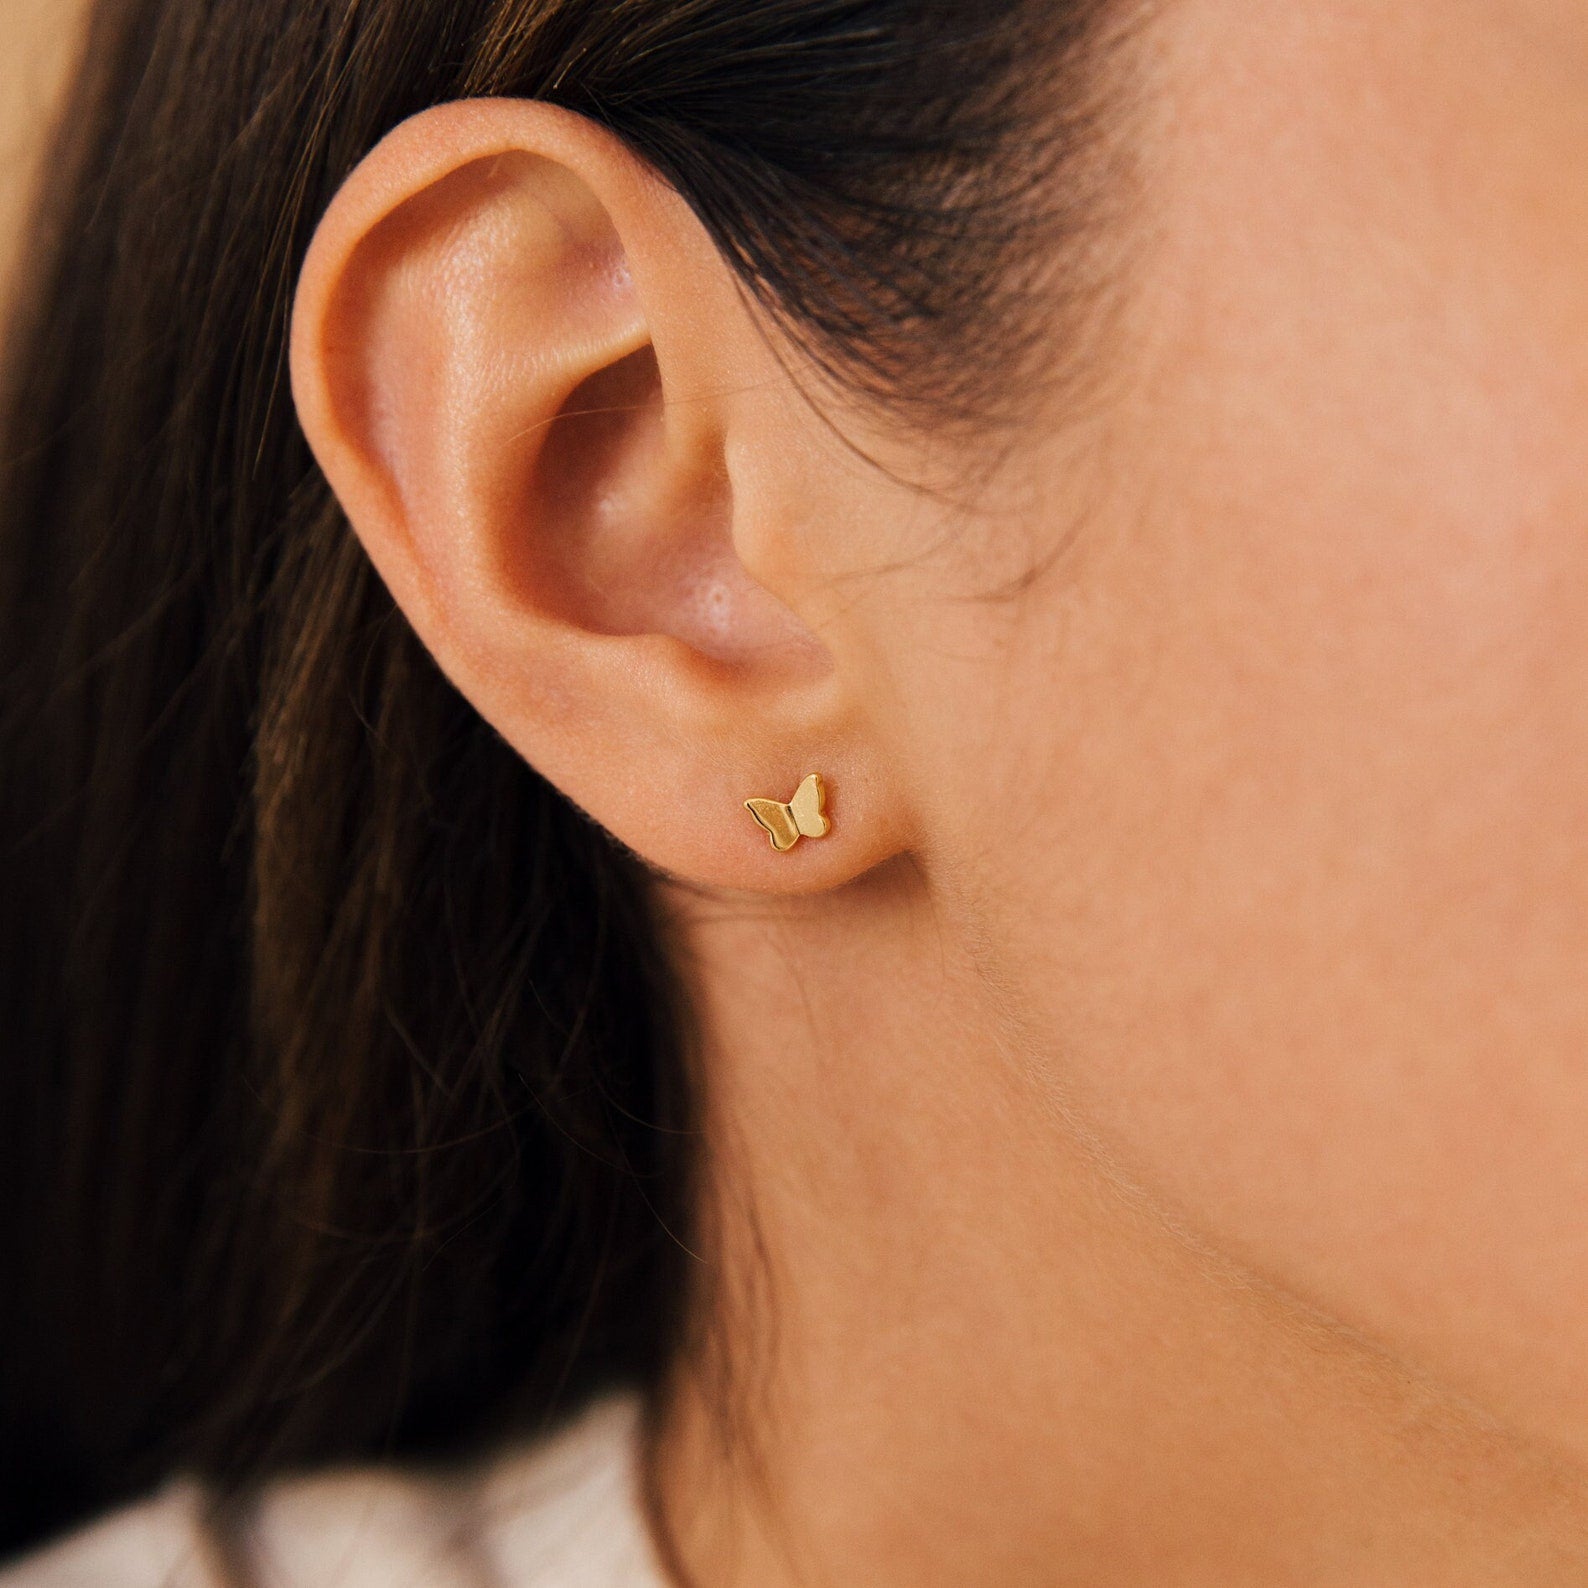 10k Solid Gold Dainty Mini Butterfly Bow Stud Earring : Shiny,cute, and  Delicate in Light Gold 